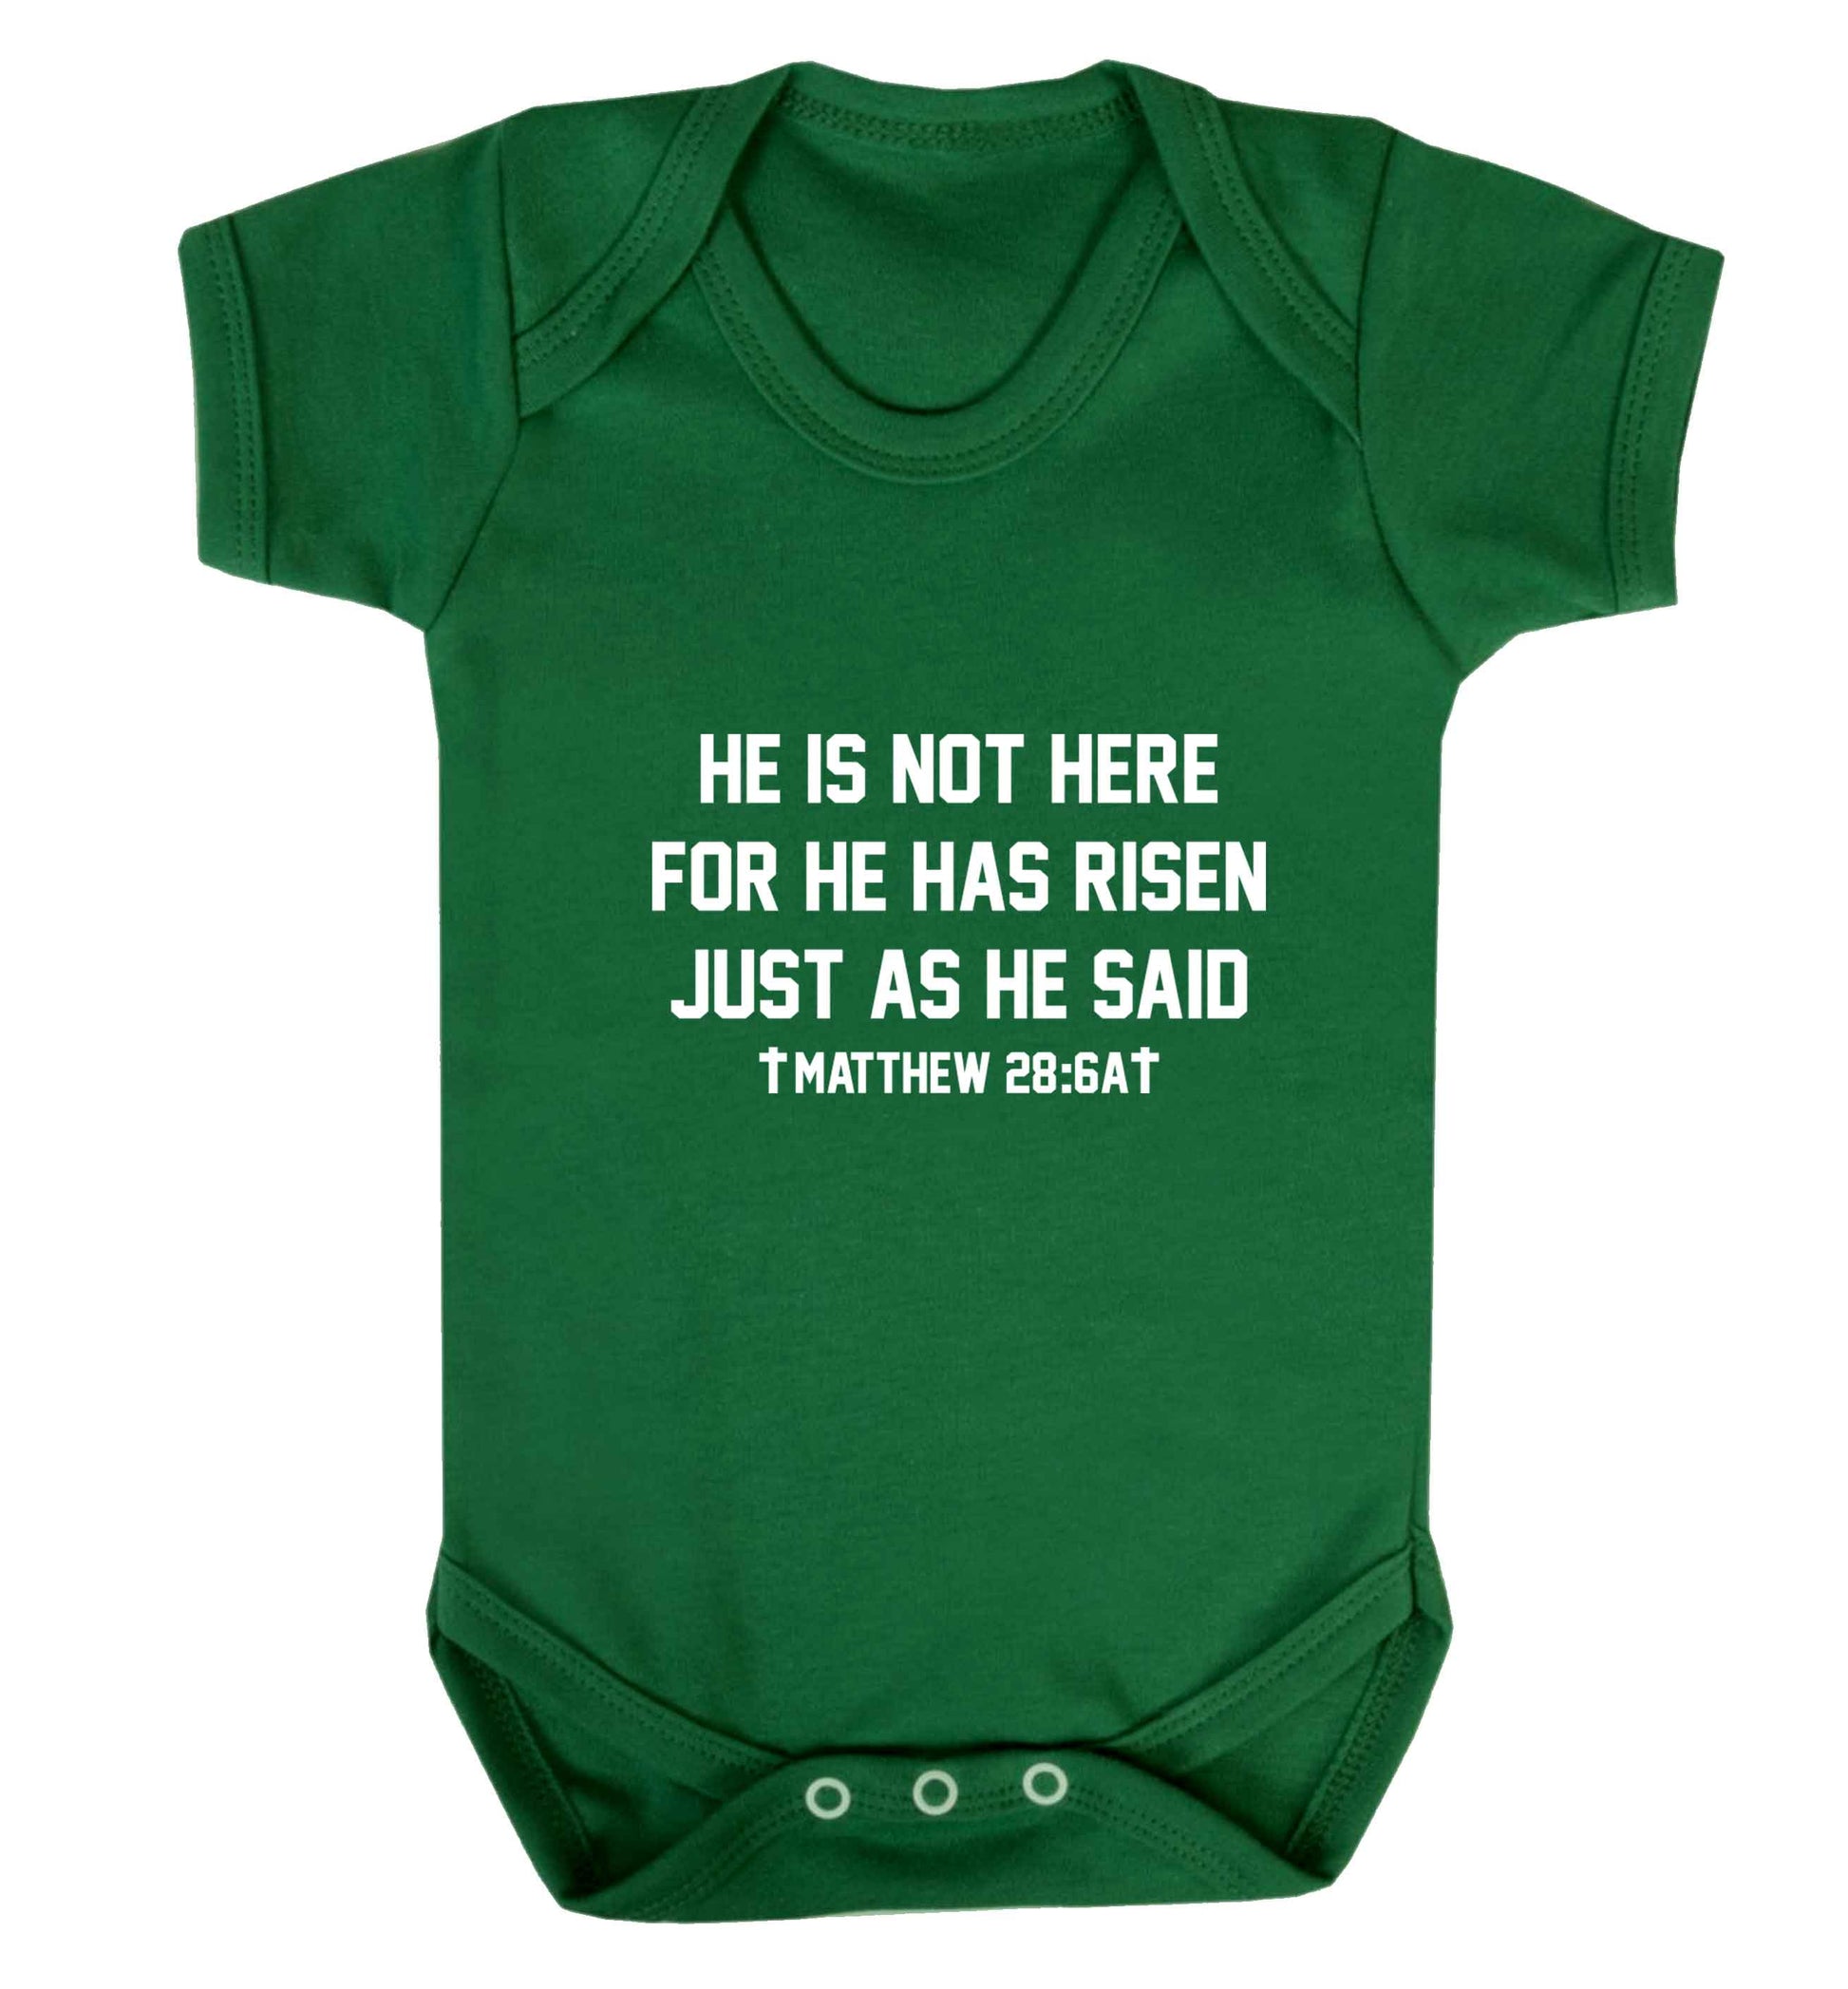 He is not here for he has risen just as he said matthew 28:6A baby vest green 18-24 months